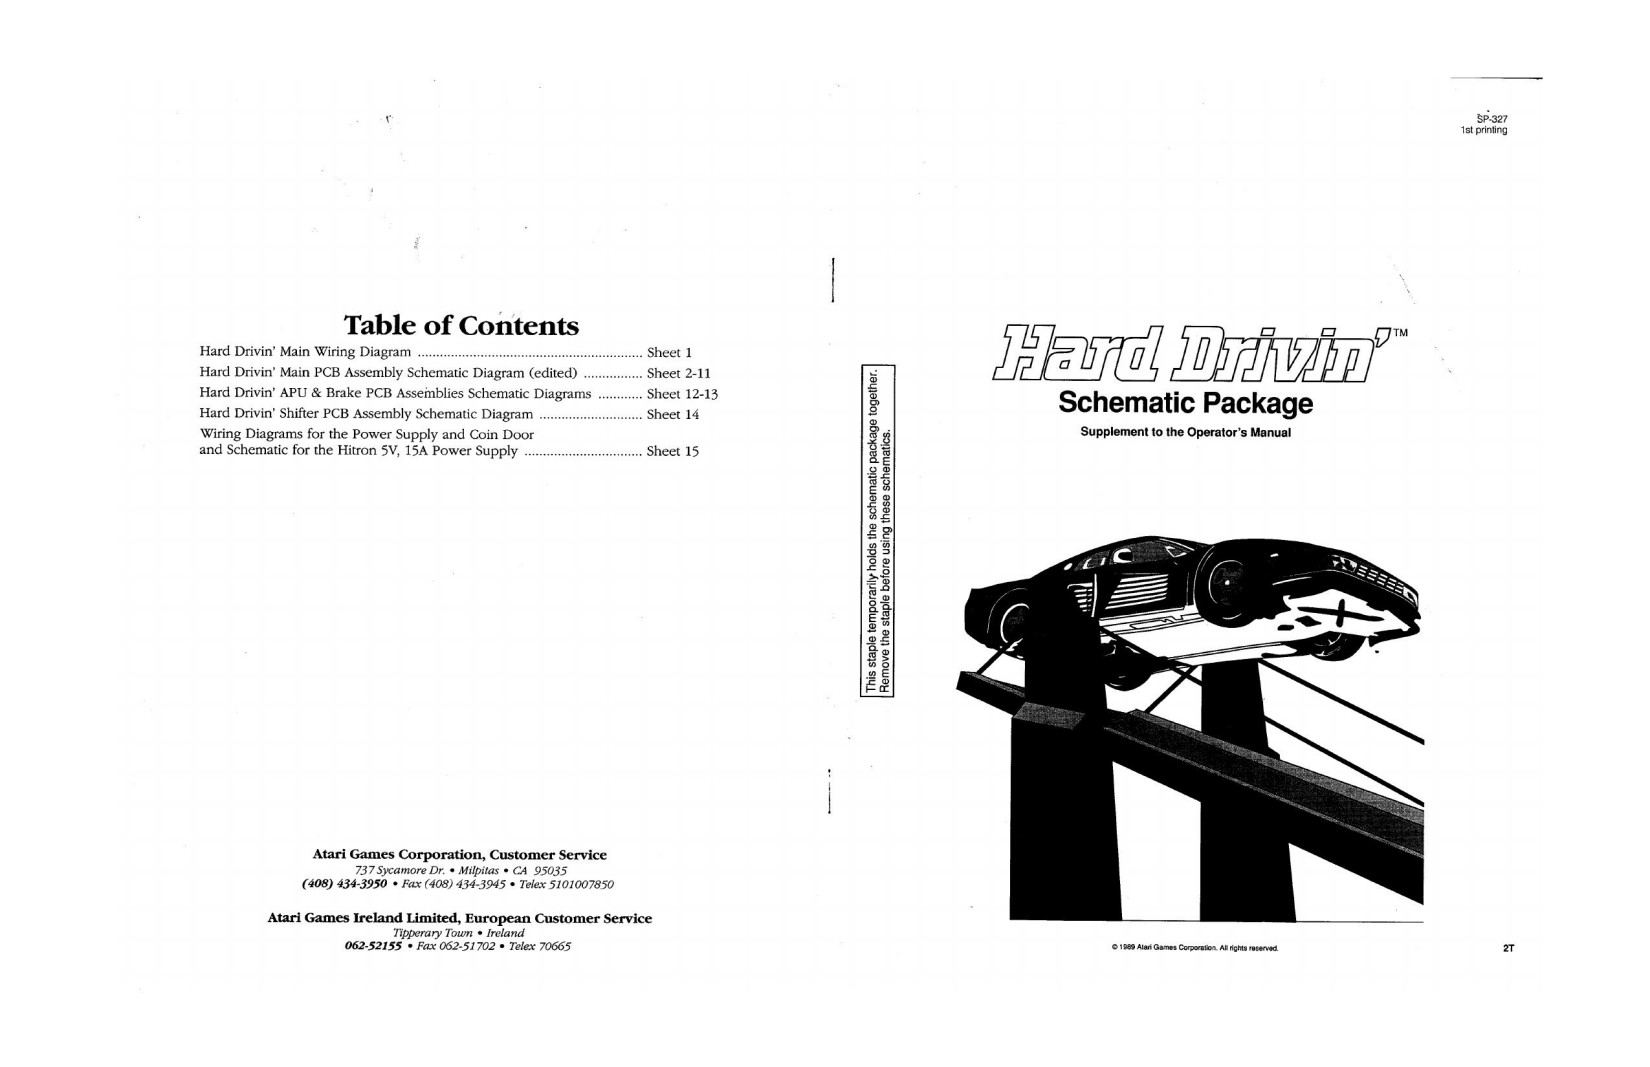 Hard Drivin' (SP-327 1st Printing) (Schematic Package) (U)